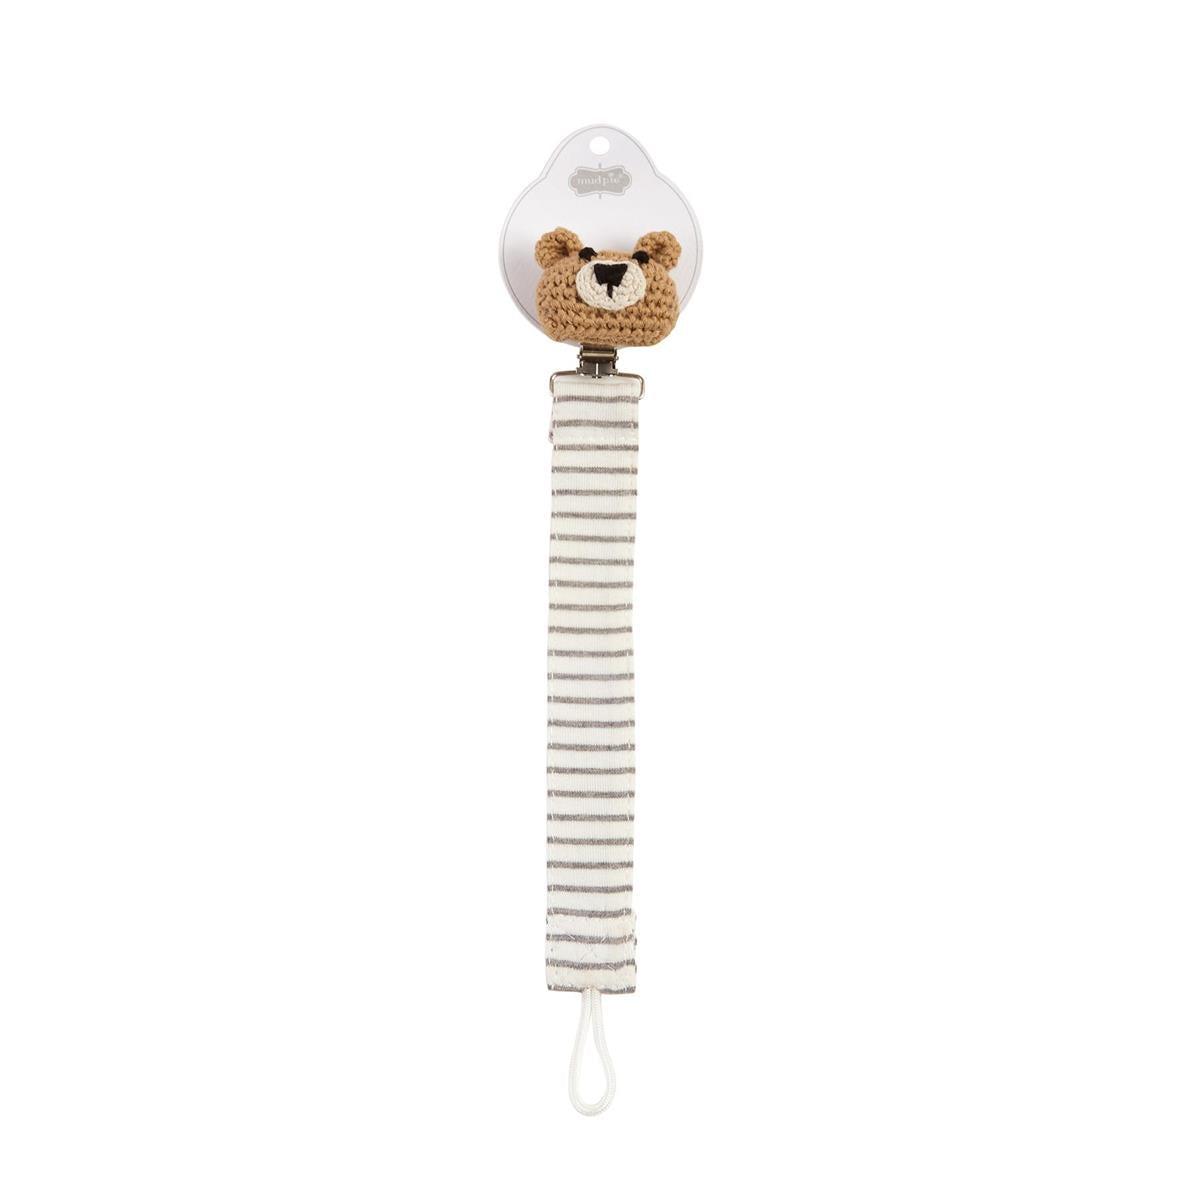 Mud Pie Bear Knit Pacy Clip - BeautyOfASite - Central Illinois Gifts, Fashion & Beauty Boutique